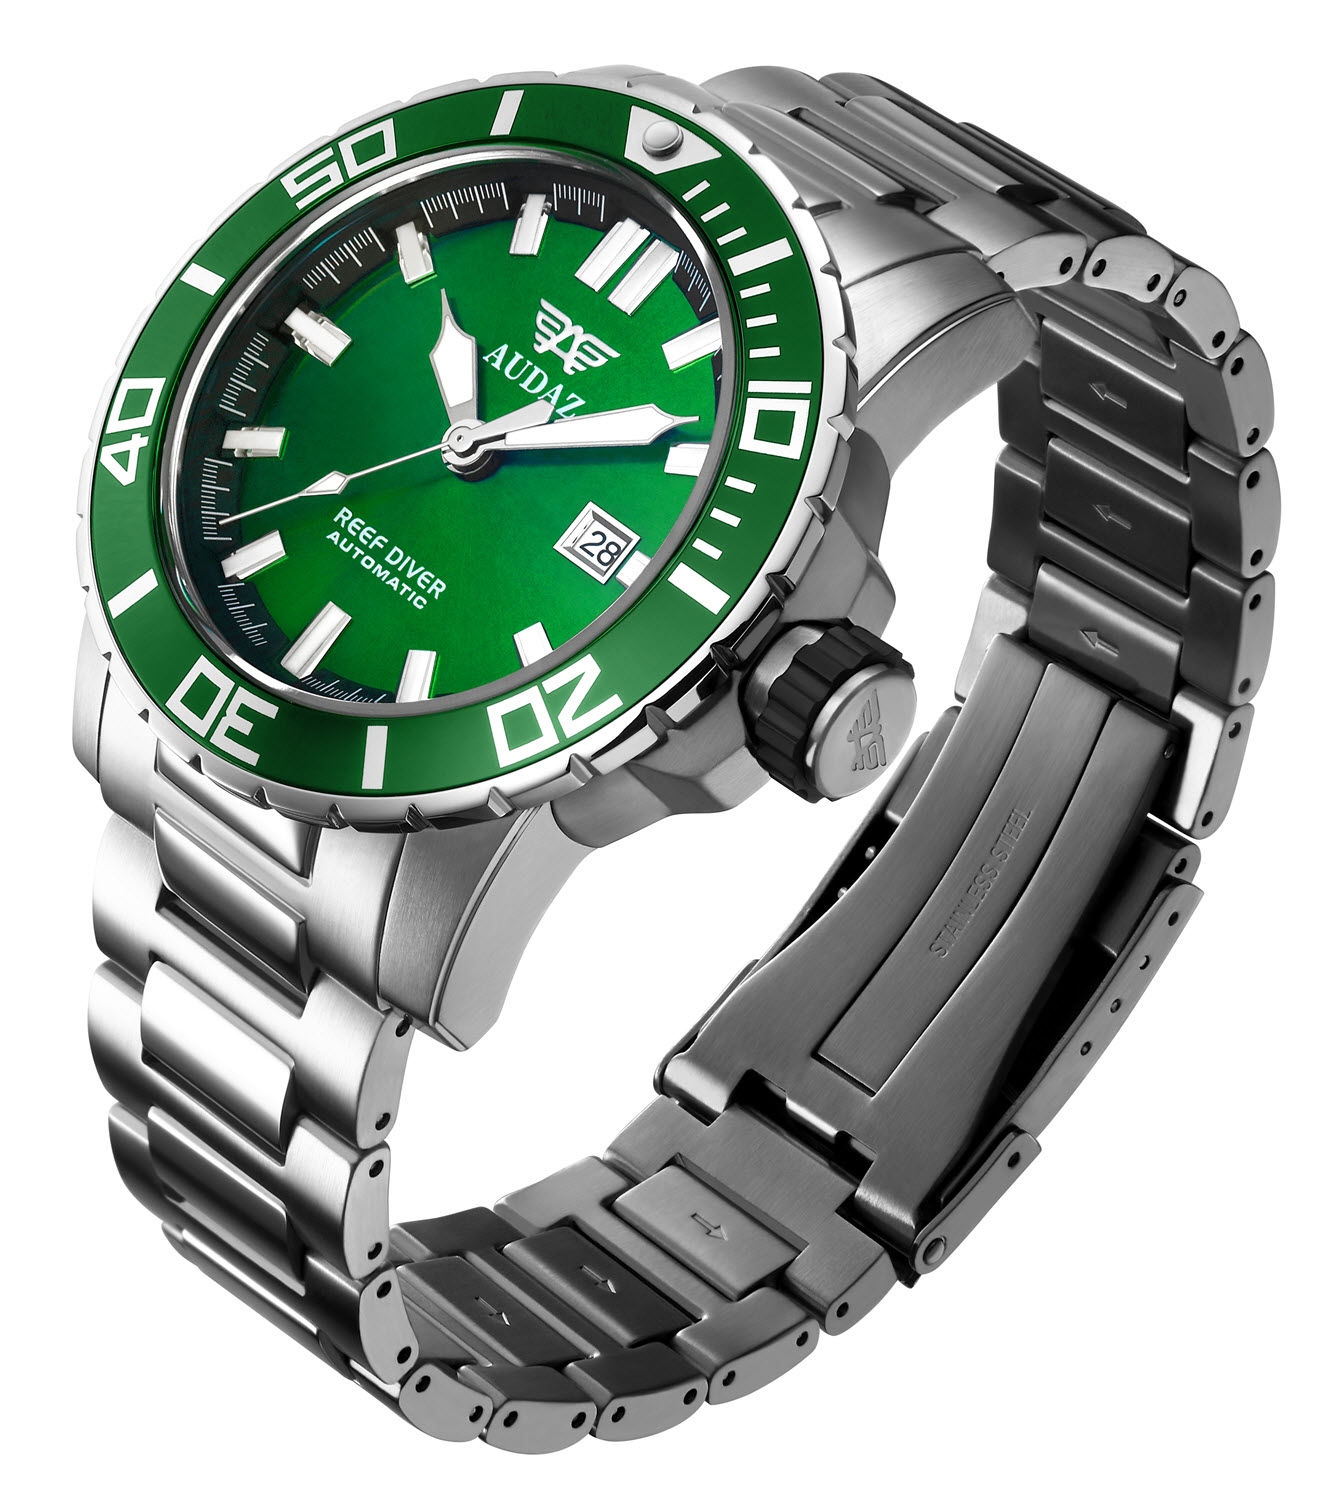 Audaz Reef Diver Green Sunray Men's Diver Automatic Watch 45mm ADZ-2040-06 - Click Image to Close